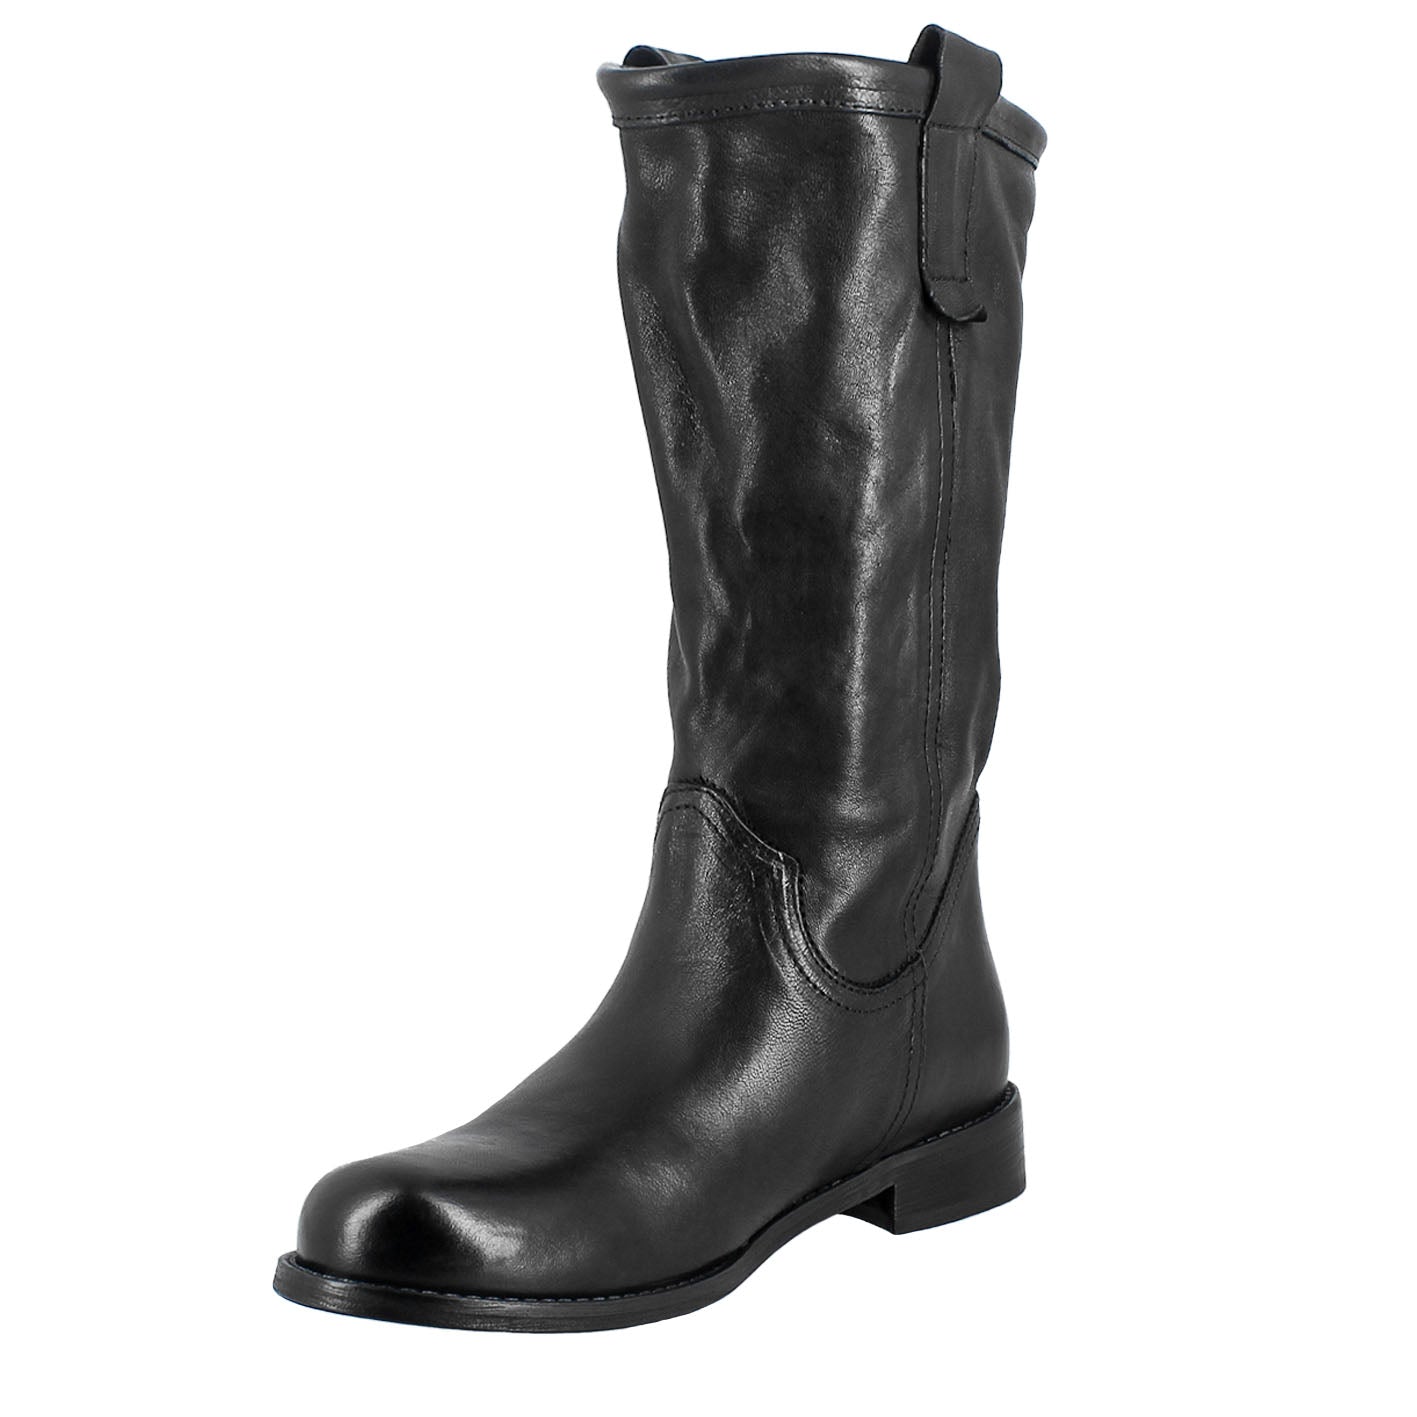 Women's calf-high boot in vintage black leather, unlined